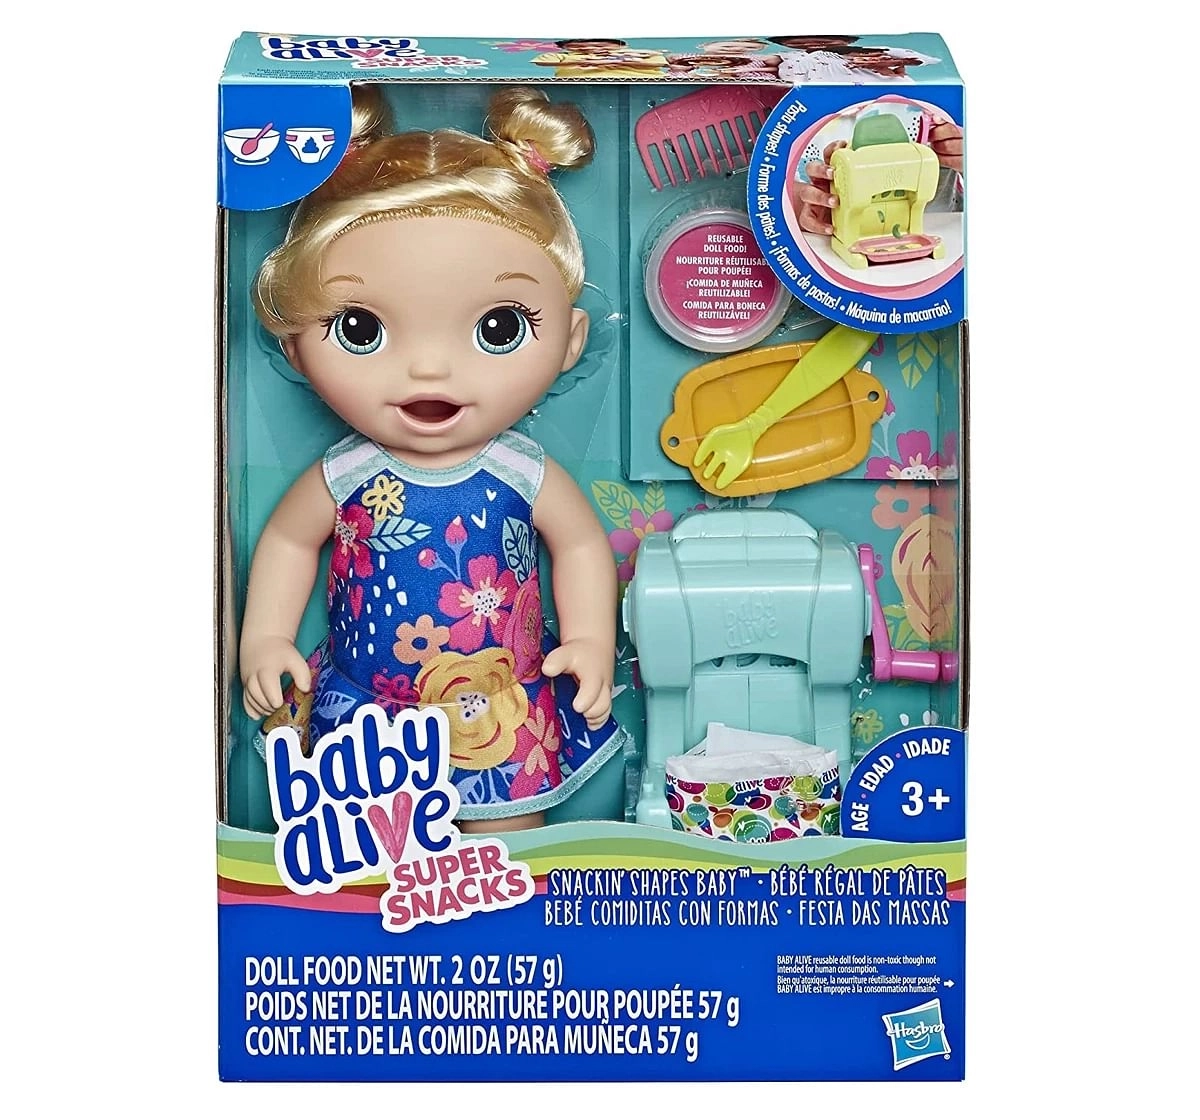 Baby Alive Snacking Shapes Baby Doll That Eats and Poops with Accessories, Pasta Maker, Reusable Doll Food 3Y+, Multicolour